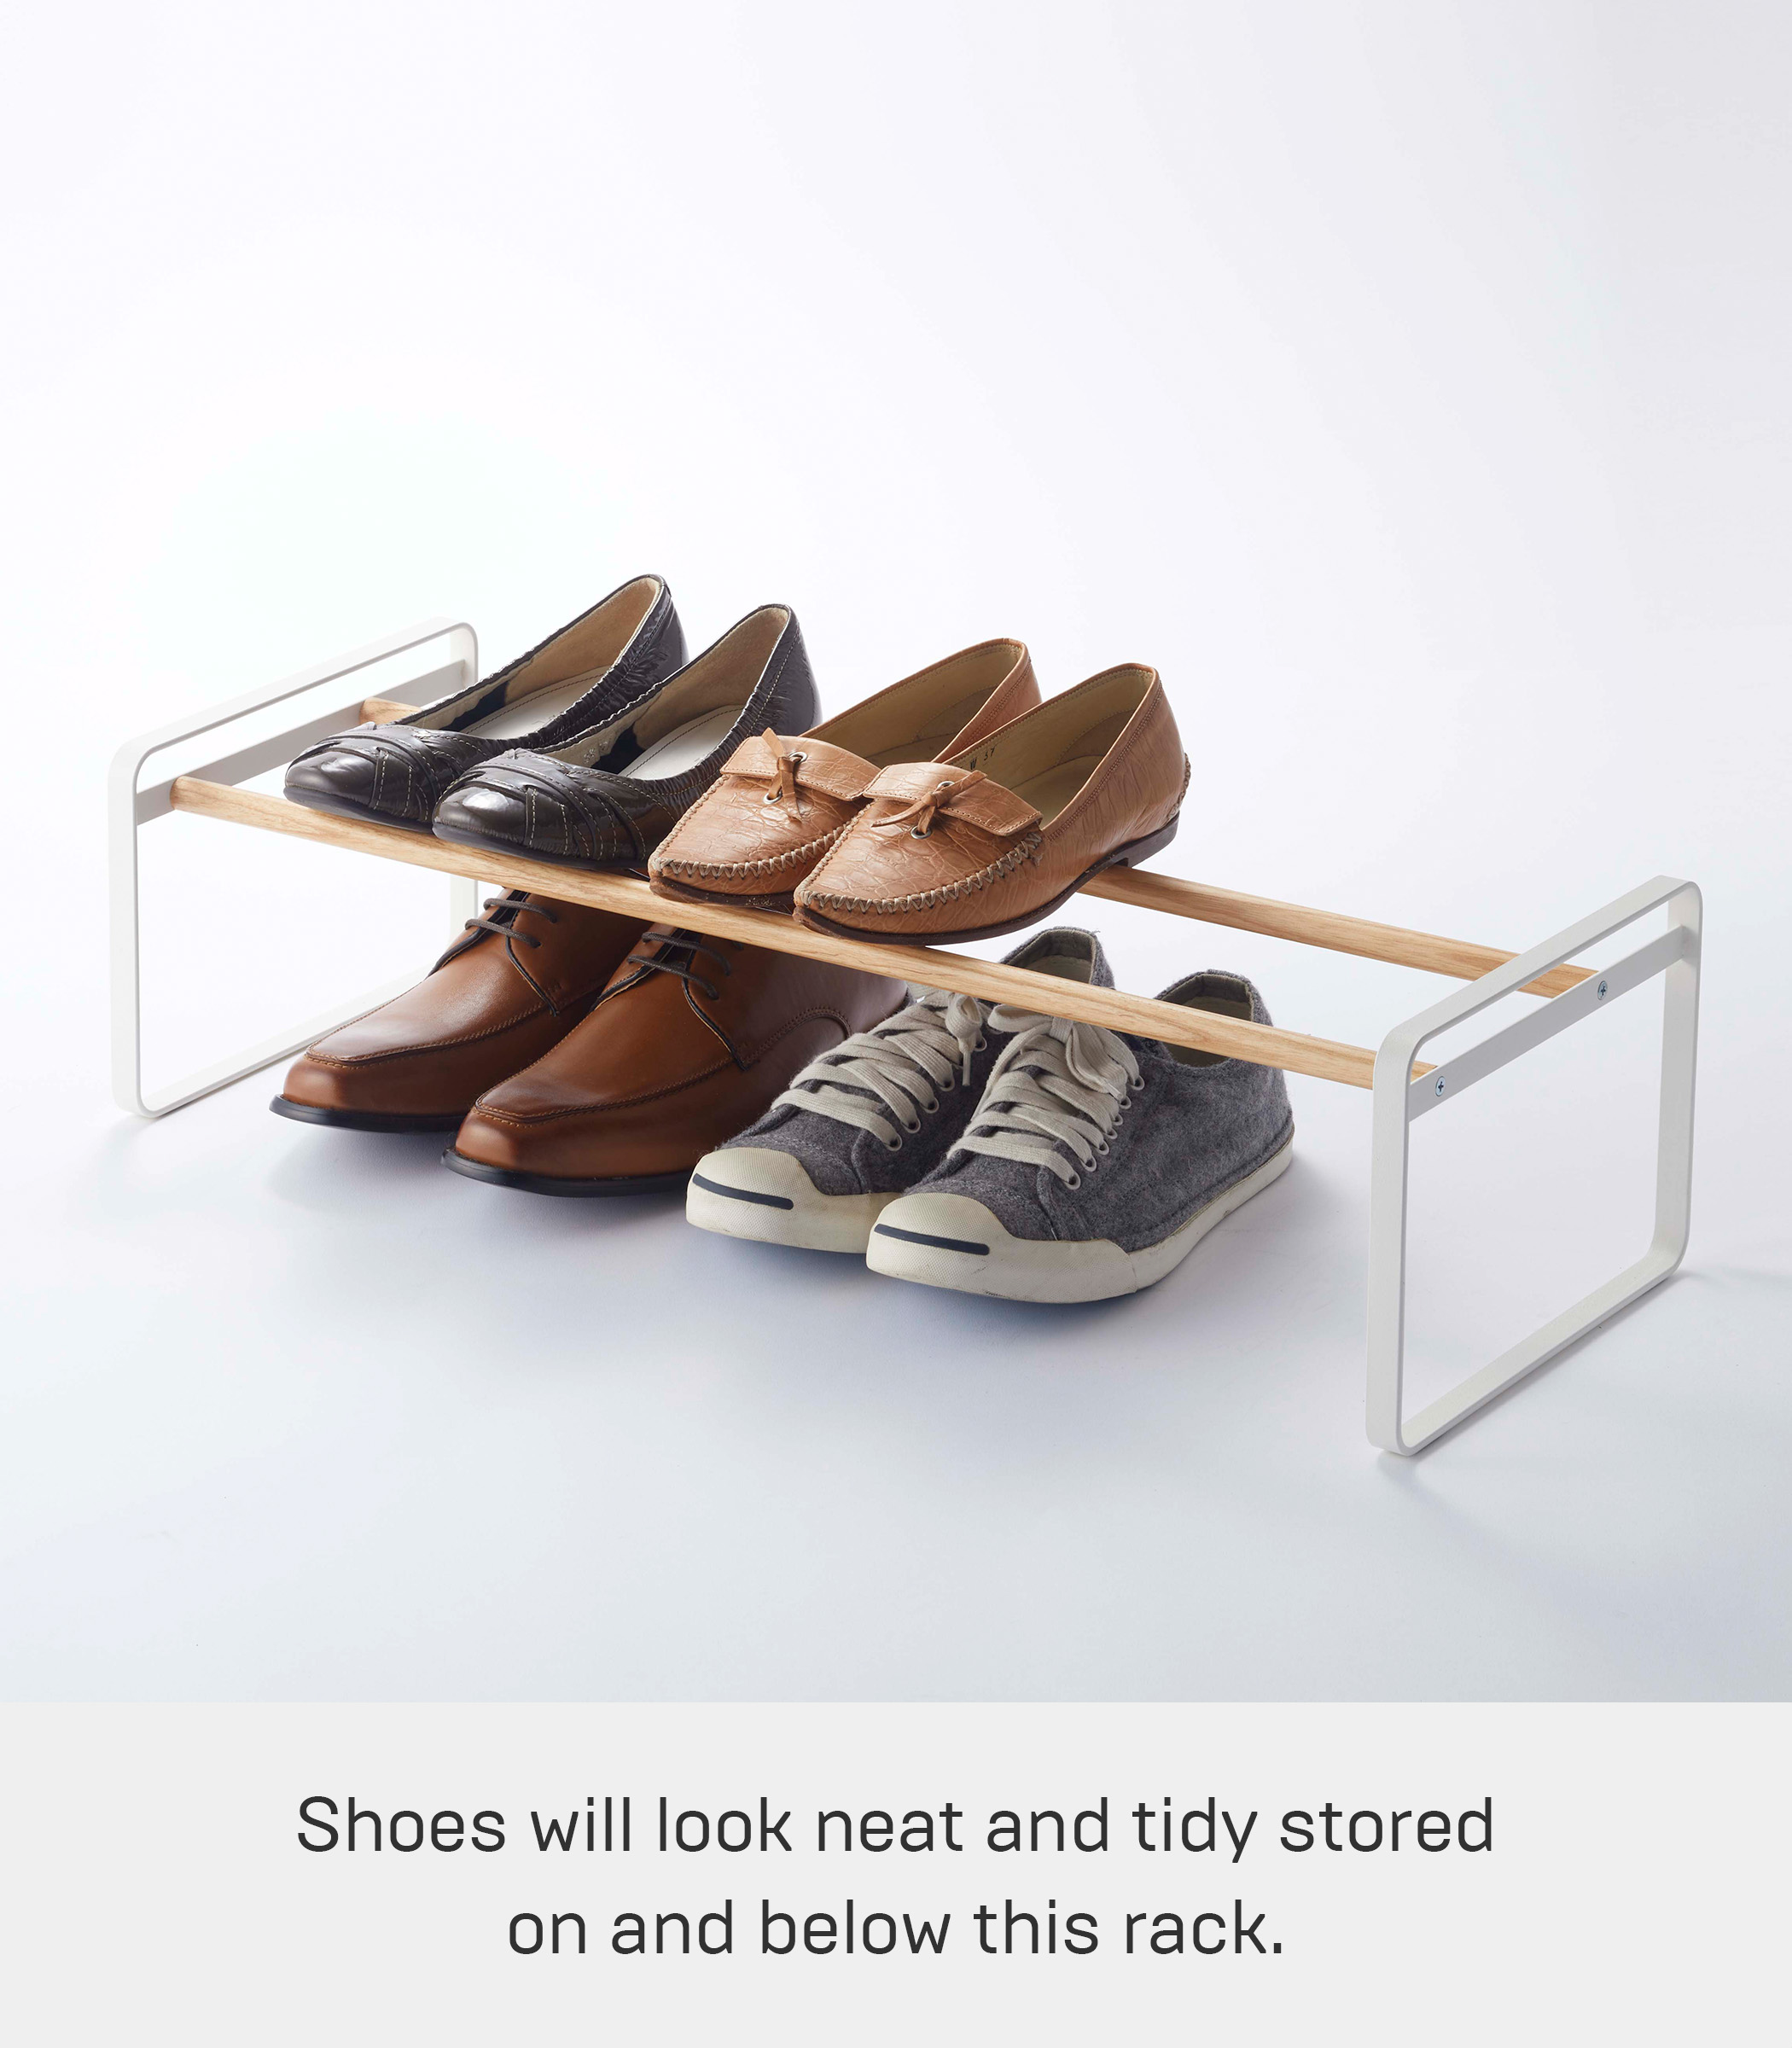 Yamazaki Home Stackable Shoe Rack, White, Steel,  Holds up to 4 pairs of shoes per shelf, Supports 6.6 pounds, Stackable - image 3 of 5